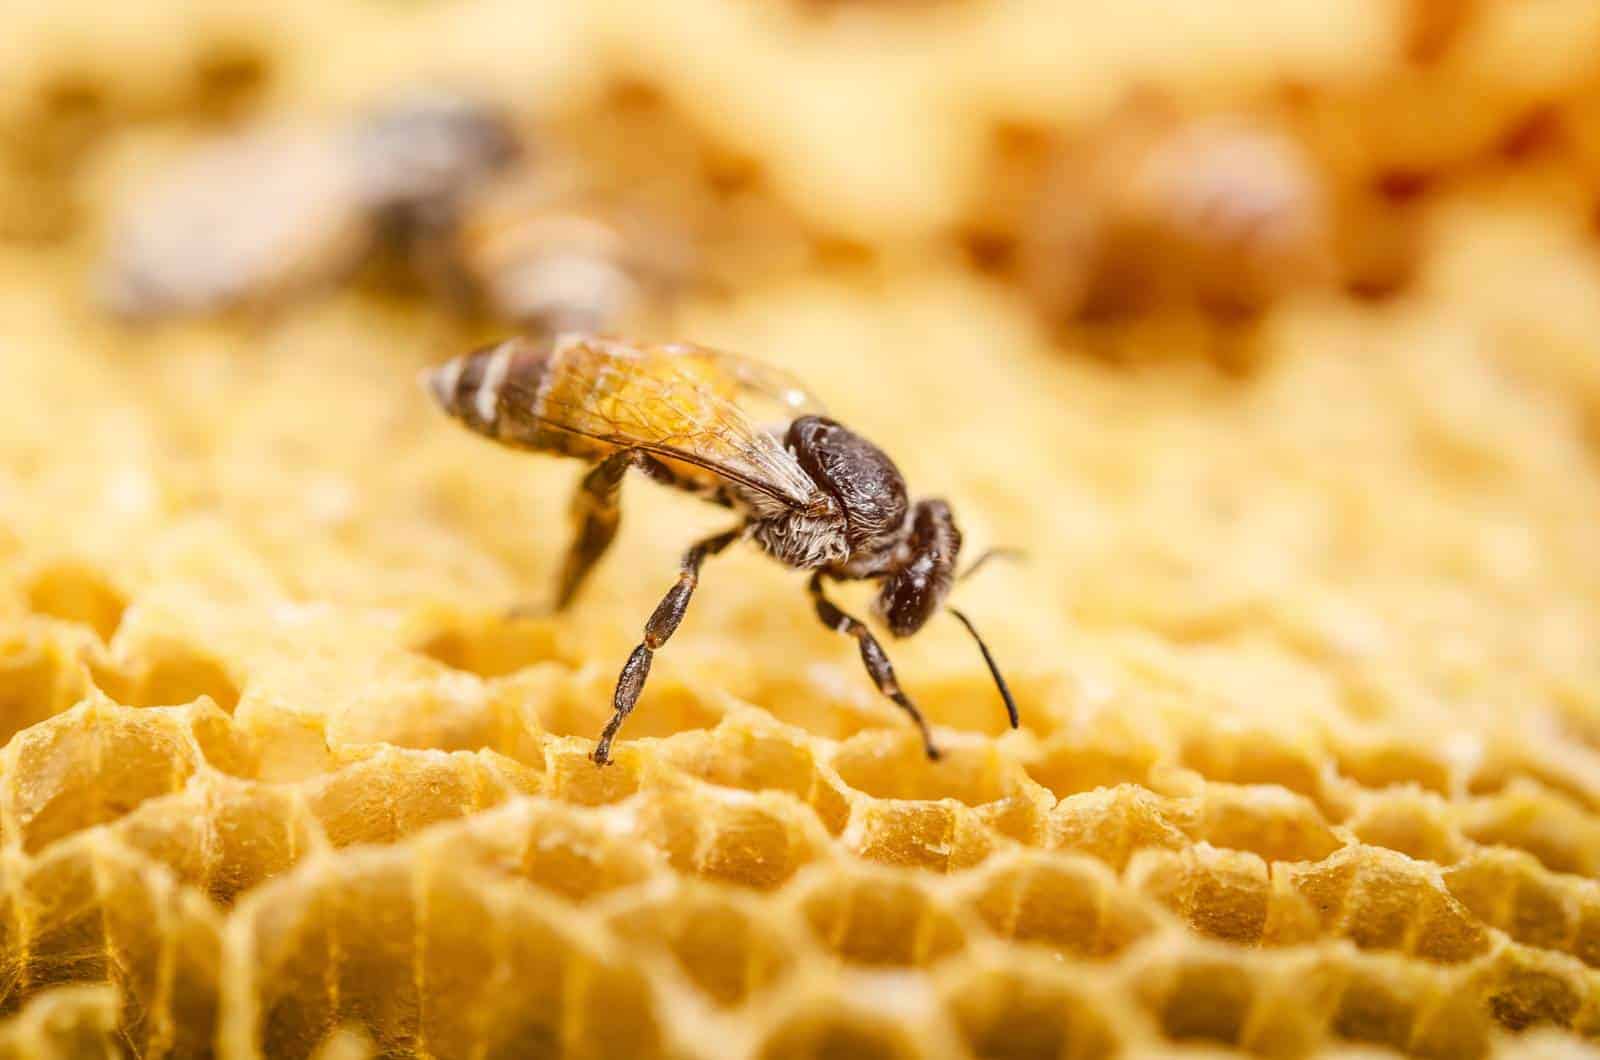 How bees make beeswax?